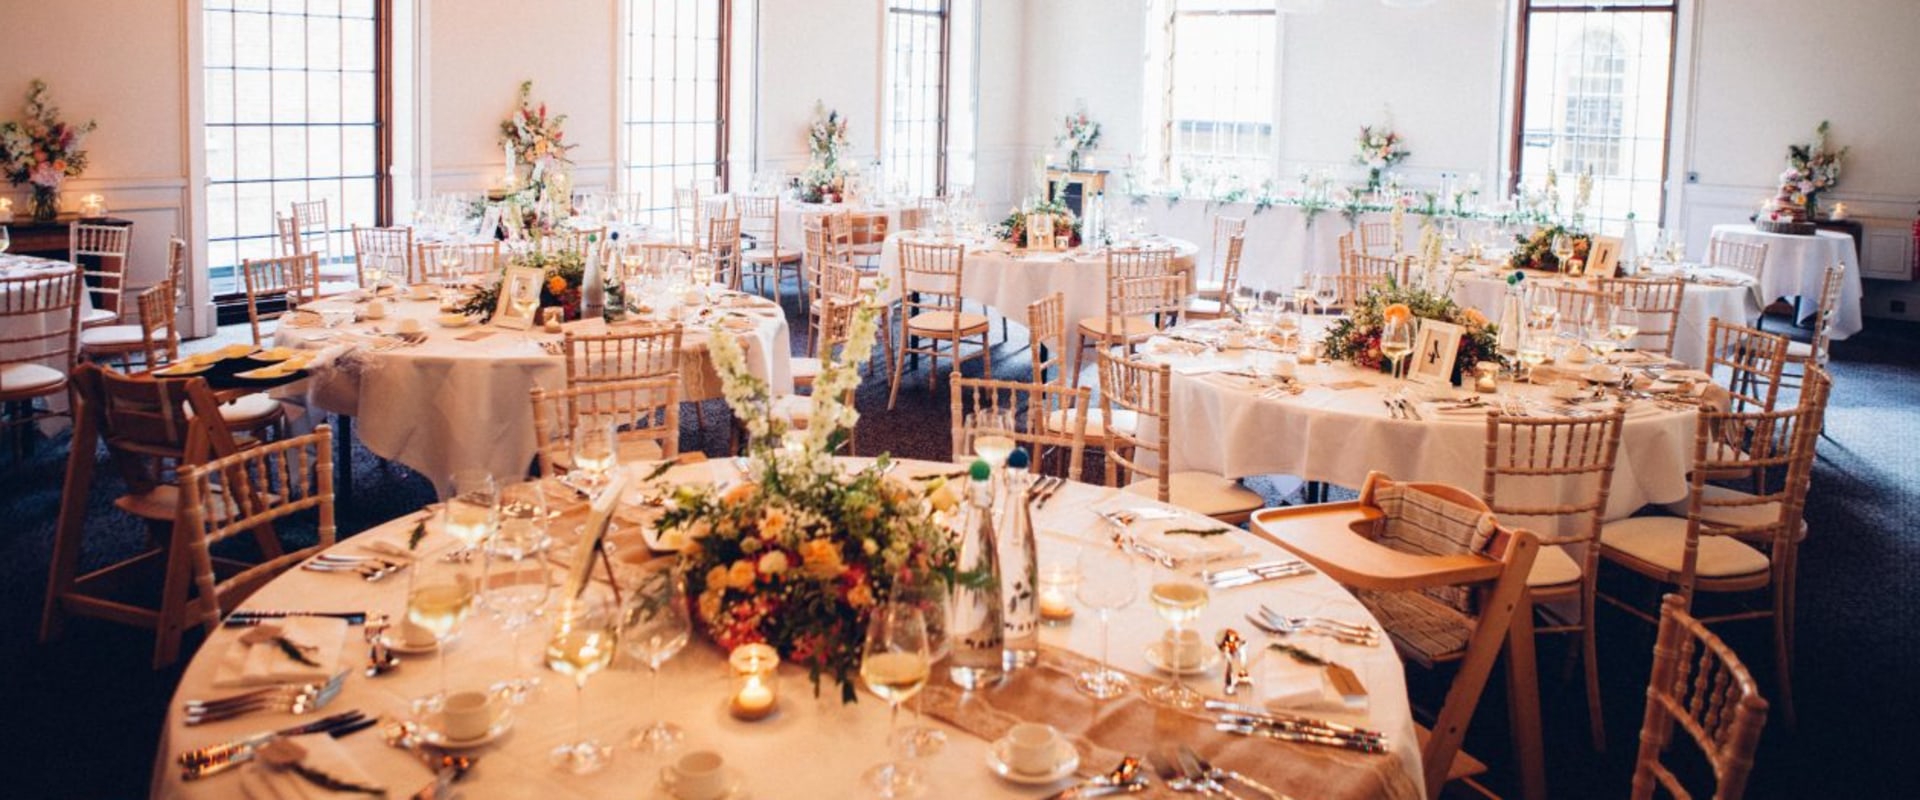 Intimate Weddings: The Perfect Choice for Small Gatherings